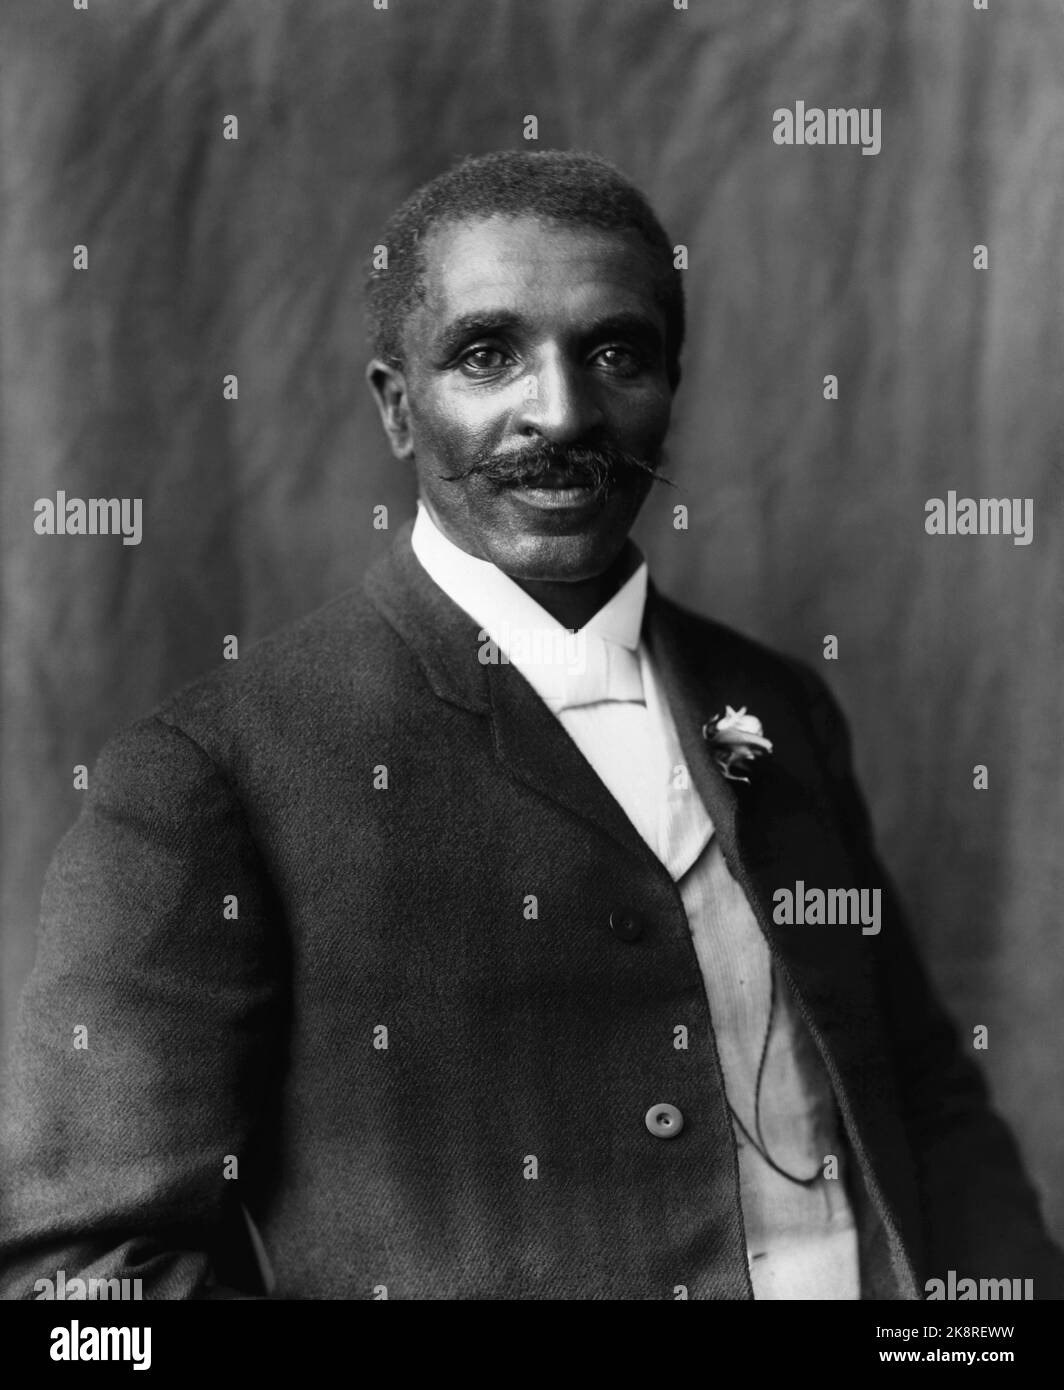 George Washington Carver (1864 – 1943) American agricultural scientist and inventor who promoted alternative crops to cotton and methods to prevent soil depletion. Stock Photo